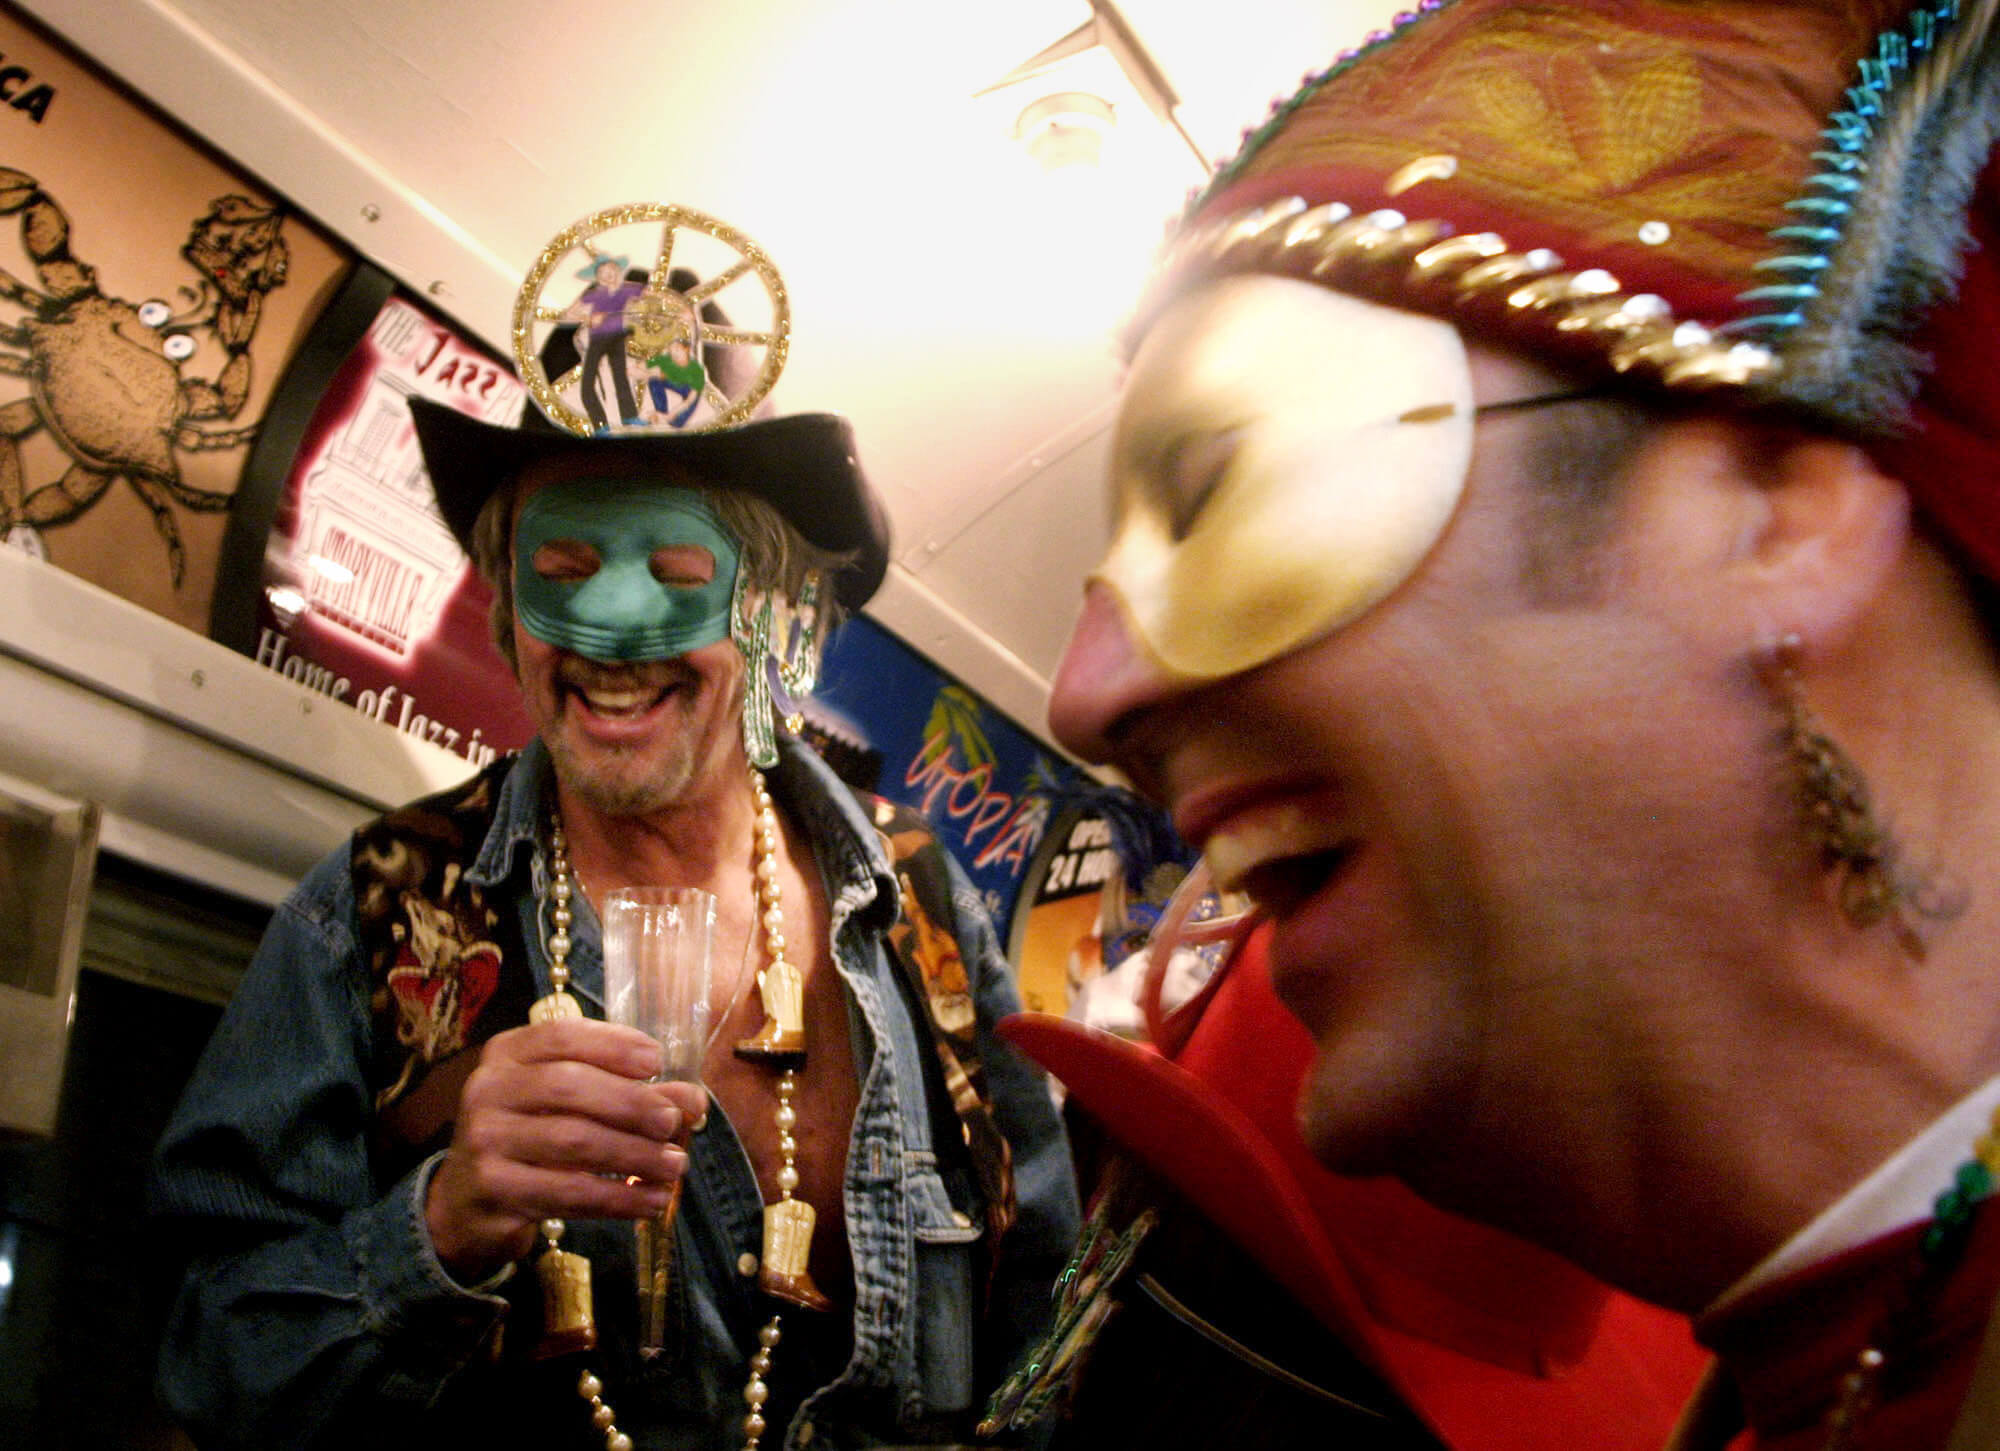 UNITED STATES - JANUARY 06:  Members of the Phunny Phorty Phellows celebrate on street car along Canal Street on "Twelth Night" heralding the arrival of Madi Gras season in New Olreans, Louisiana, on Friday, December 6, 2006.  (Photo by Mario Villafuerte/Bloomberg via Getty Images)